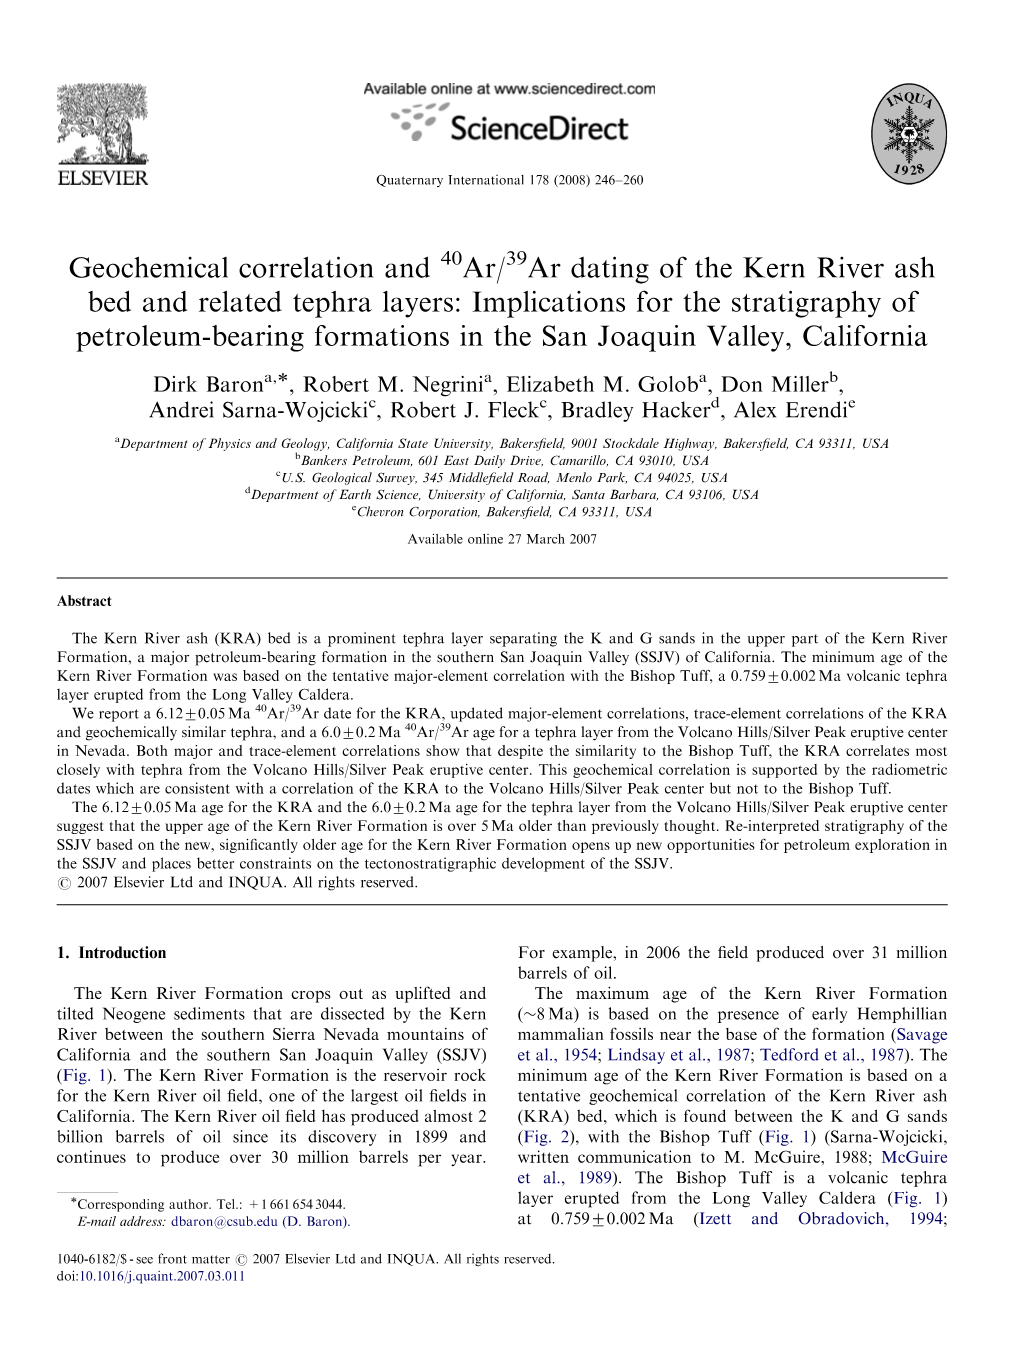 Ar Dating of the Kern River Ash Bed and Related Tephra Layers: Implications for the Stratigraphy of Petroleum-Bearing Formations in the San Joaquin Valley, California